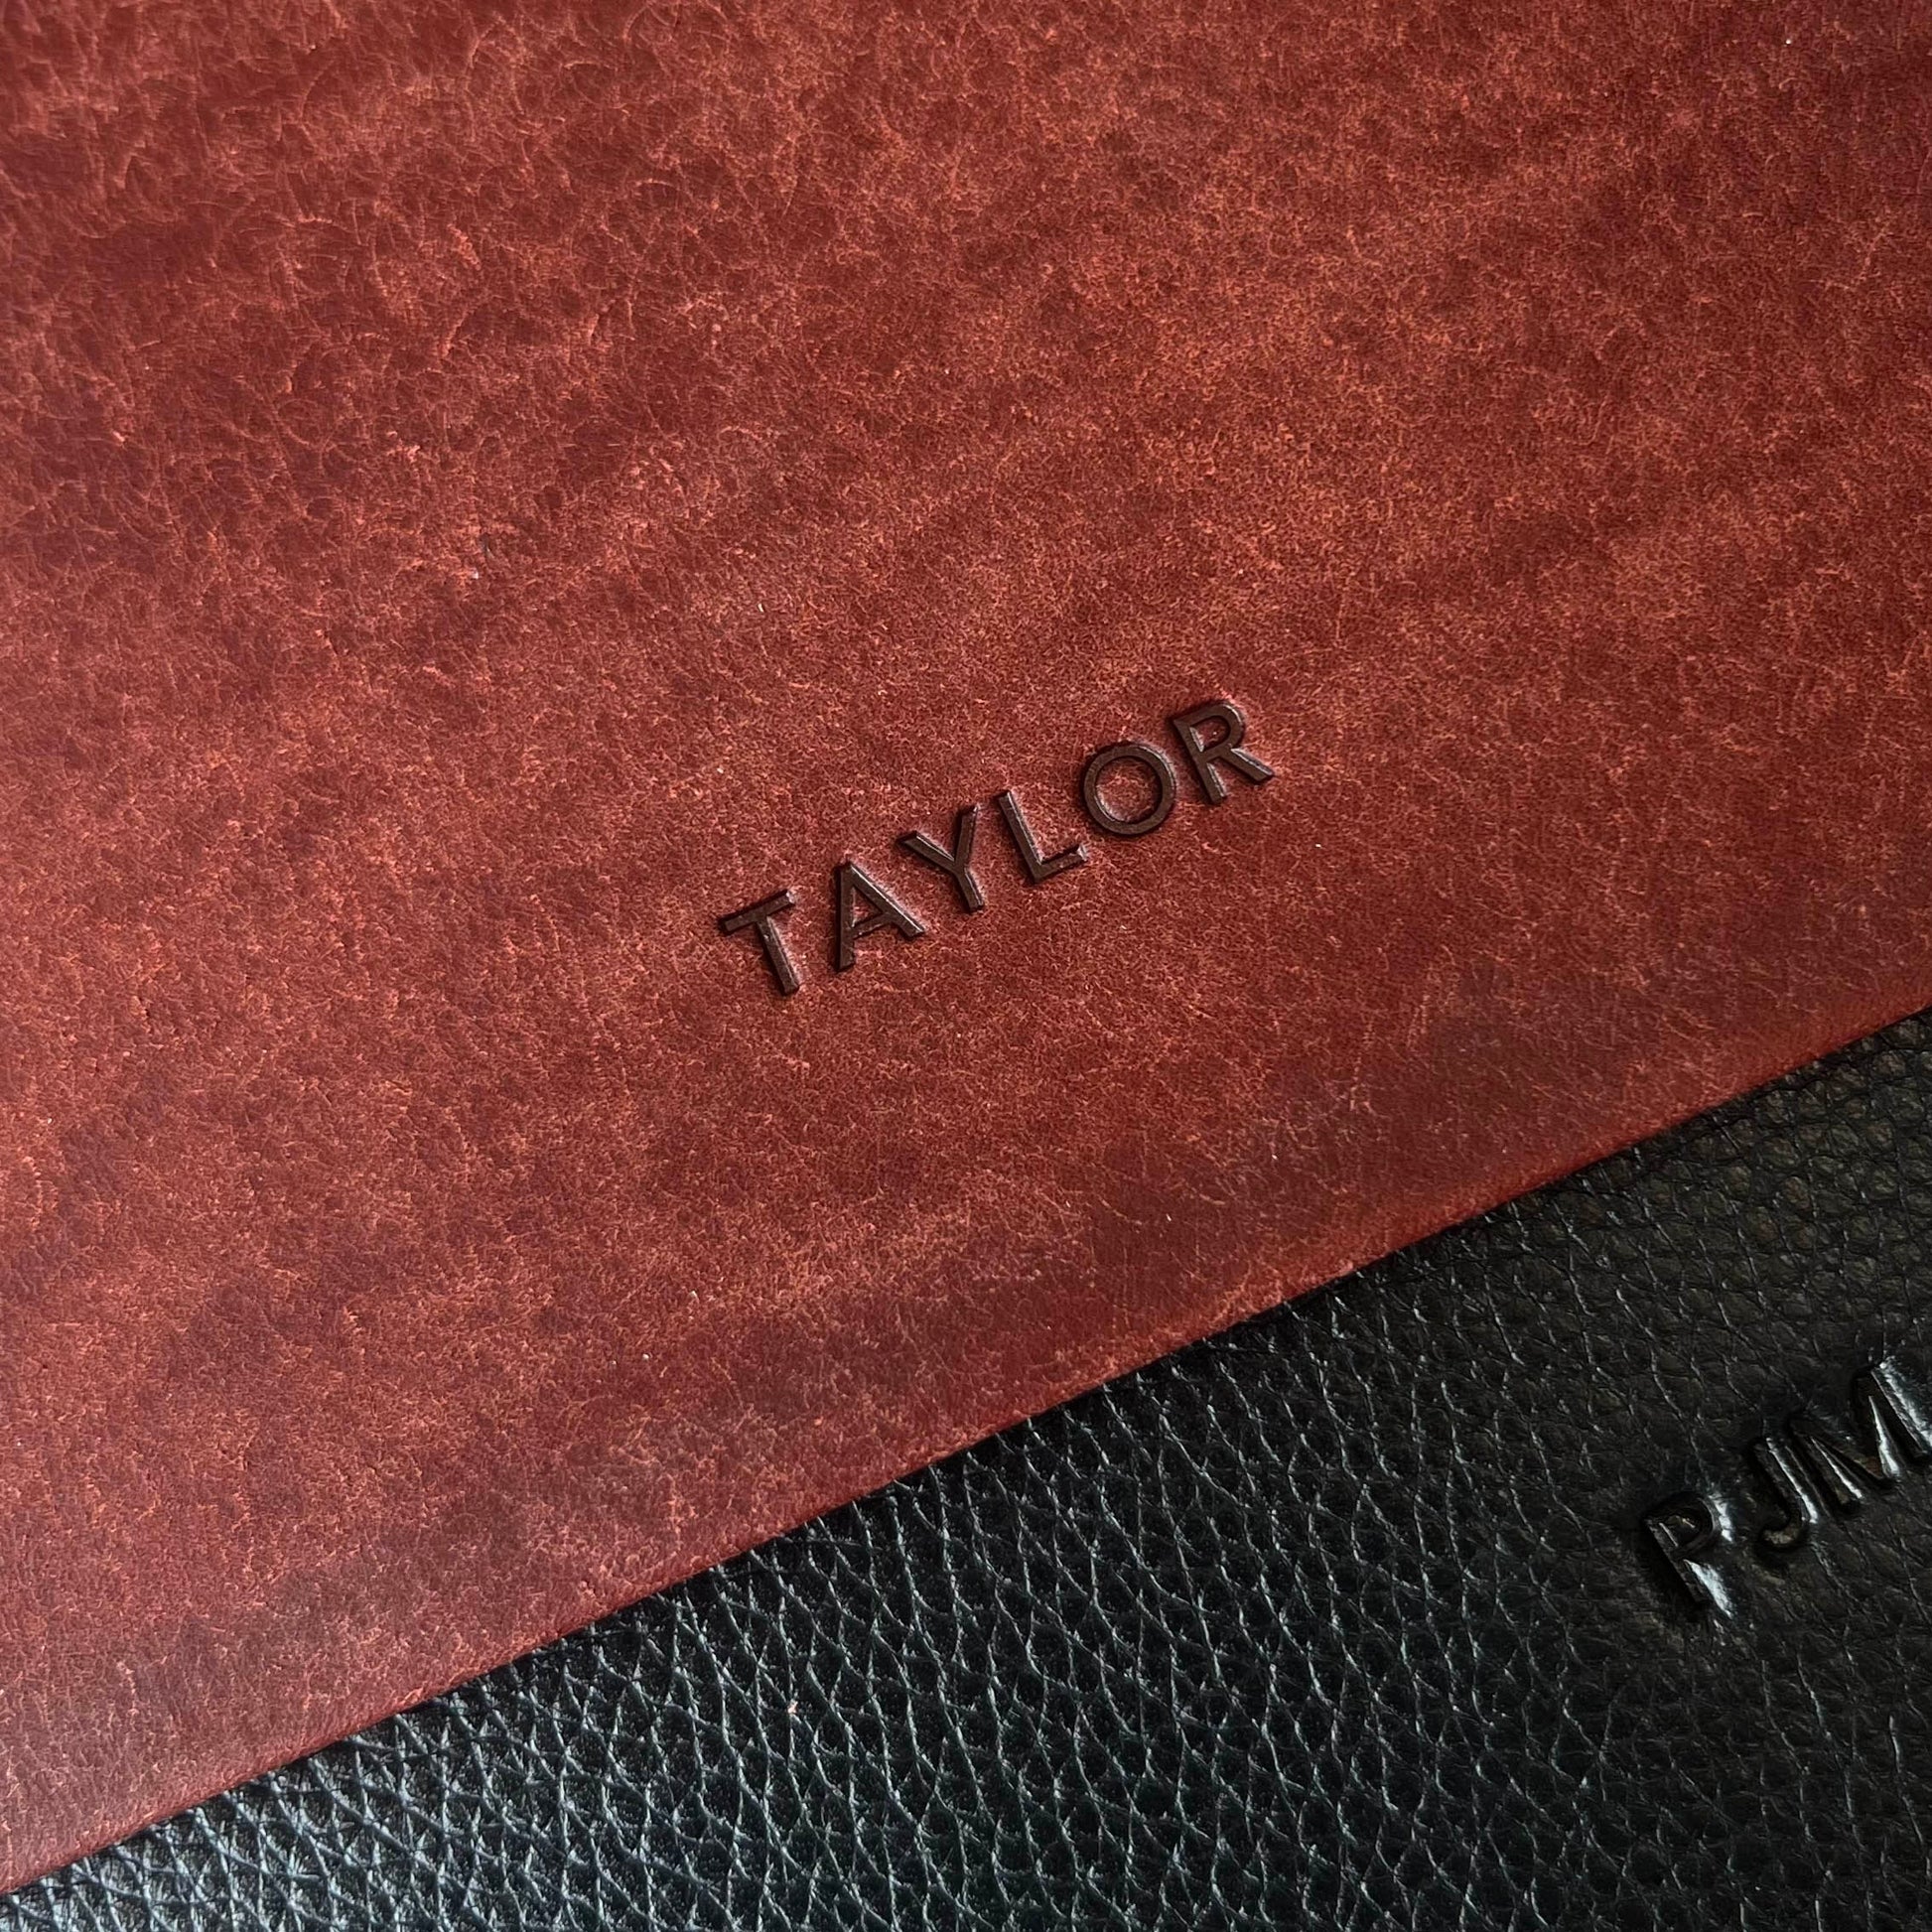 Personalize the case with heat stamping your name on leather. Add a touch of warmth